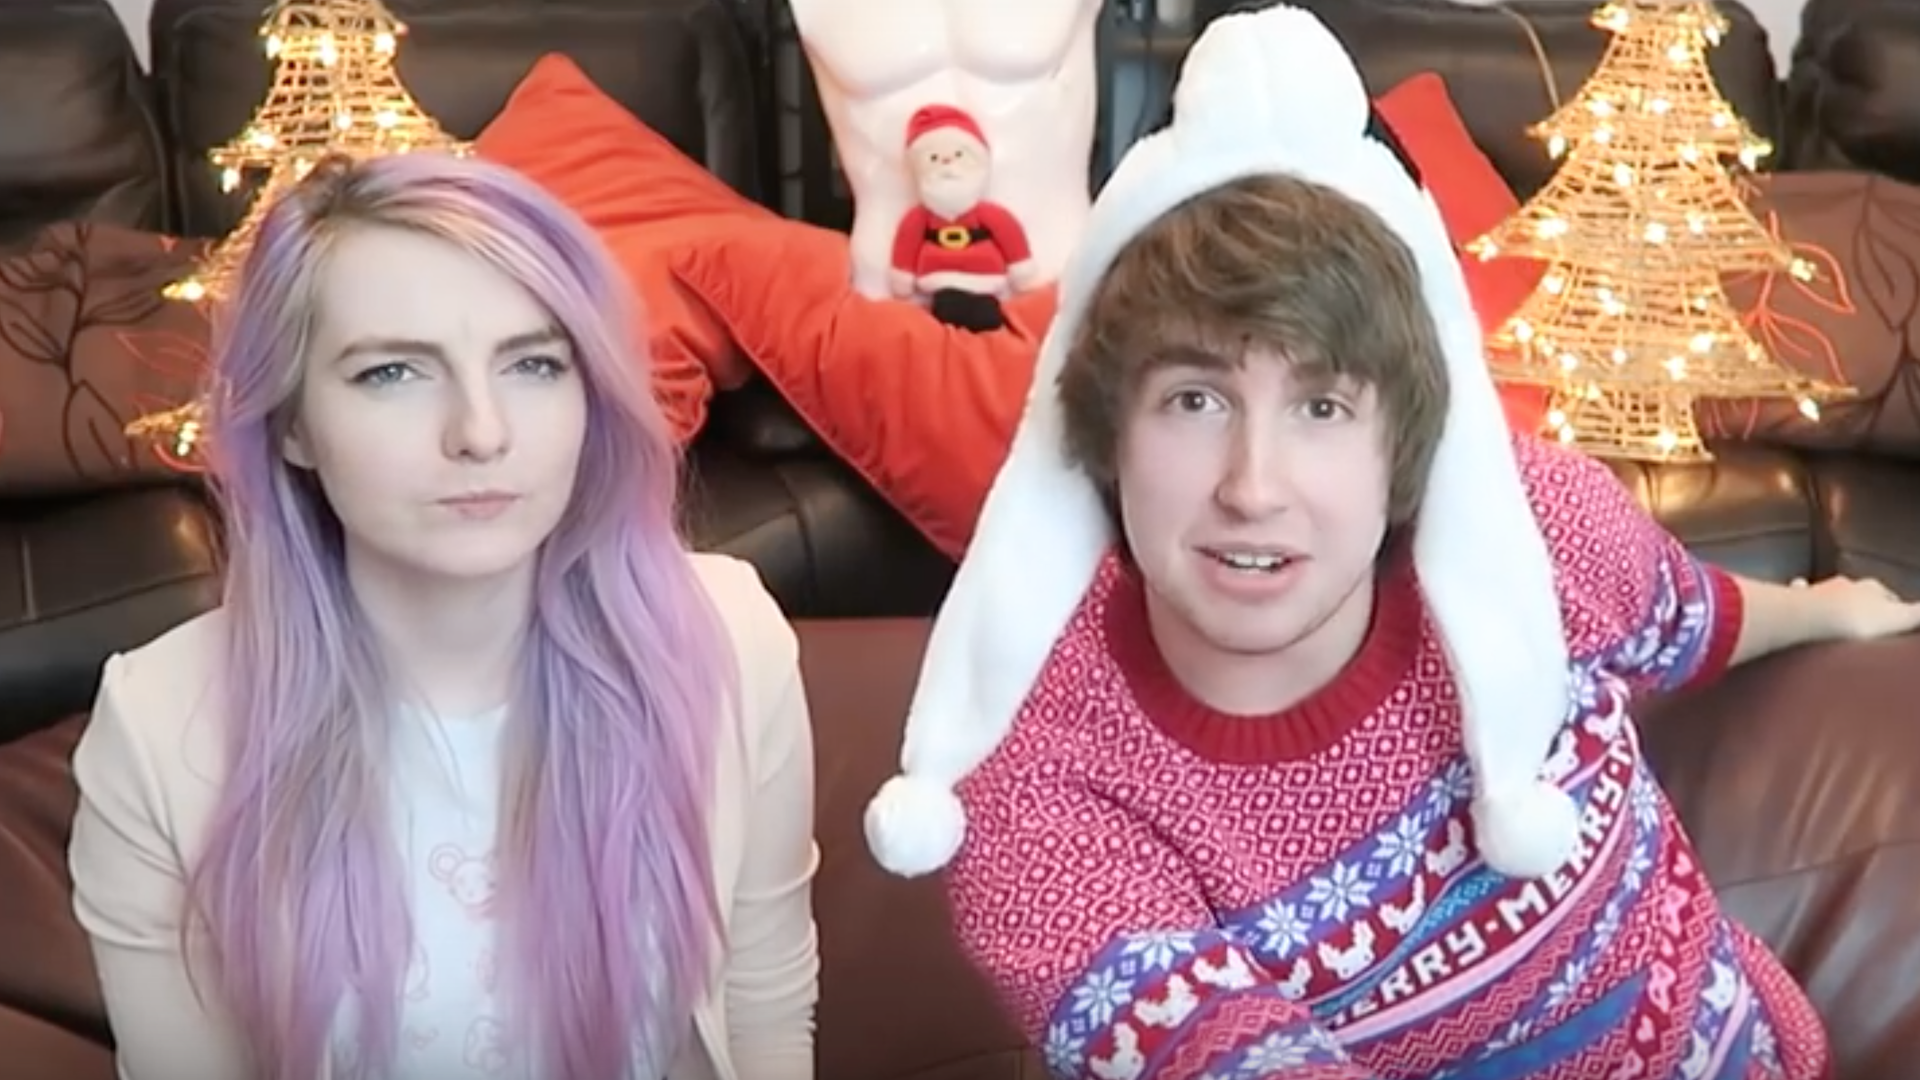 LDShadowLady and TheOrionSound